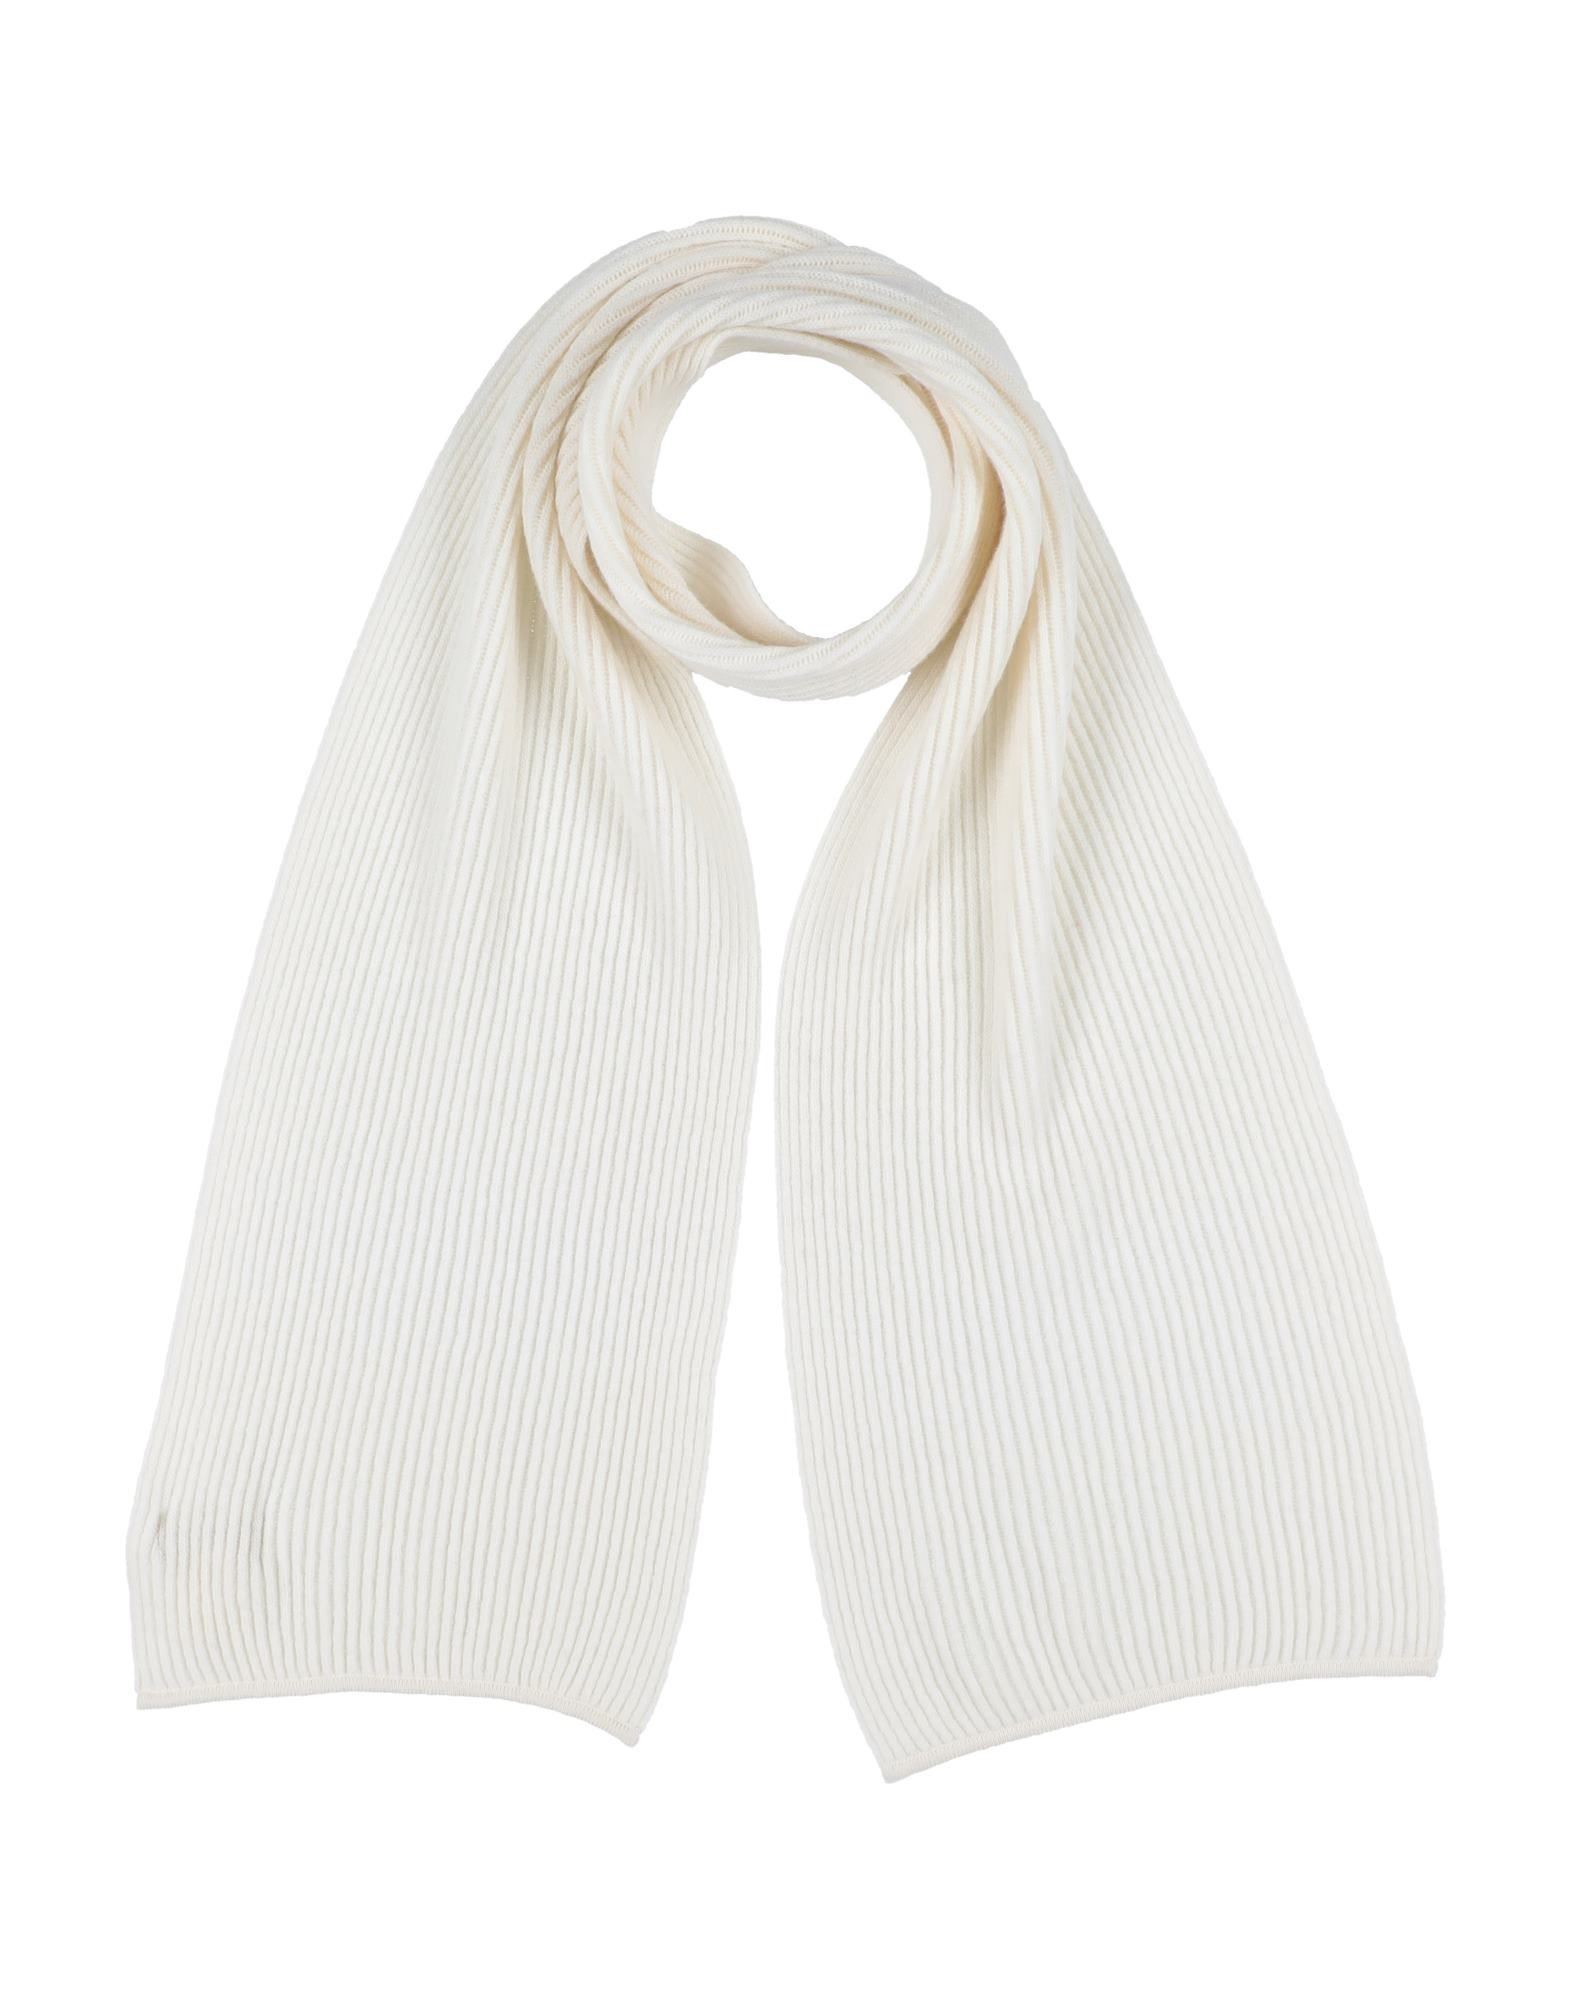 Abkost Scarves In Ivory